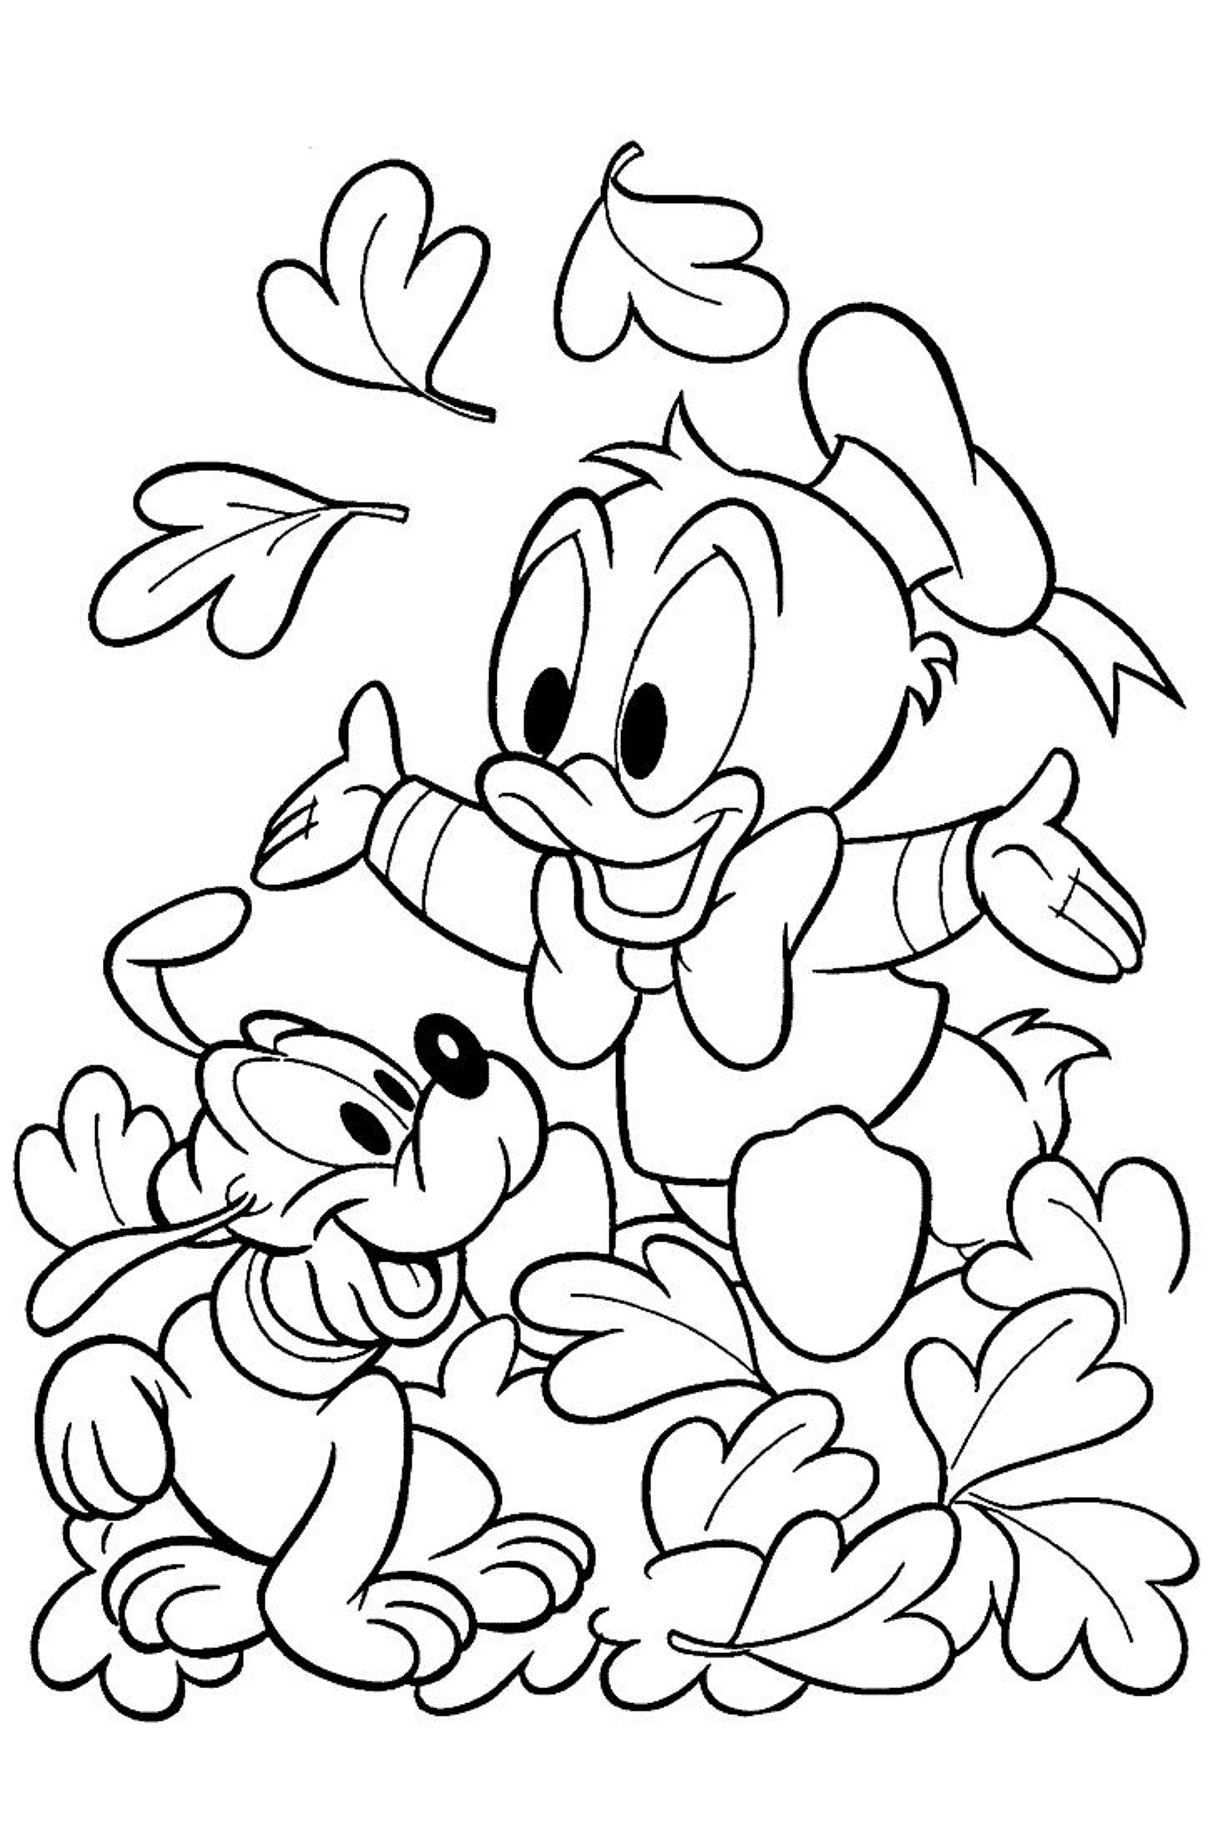 Pluto Colouring Pages Fumacolor Fall Coloring Pages Disney Coloring Pages Printables